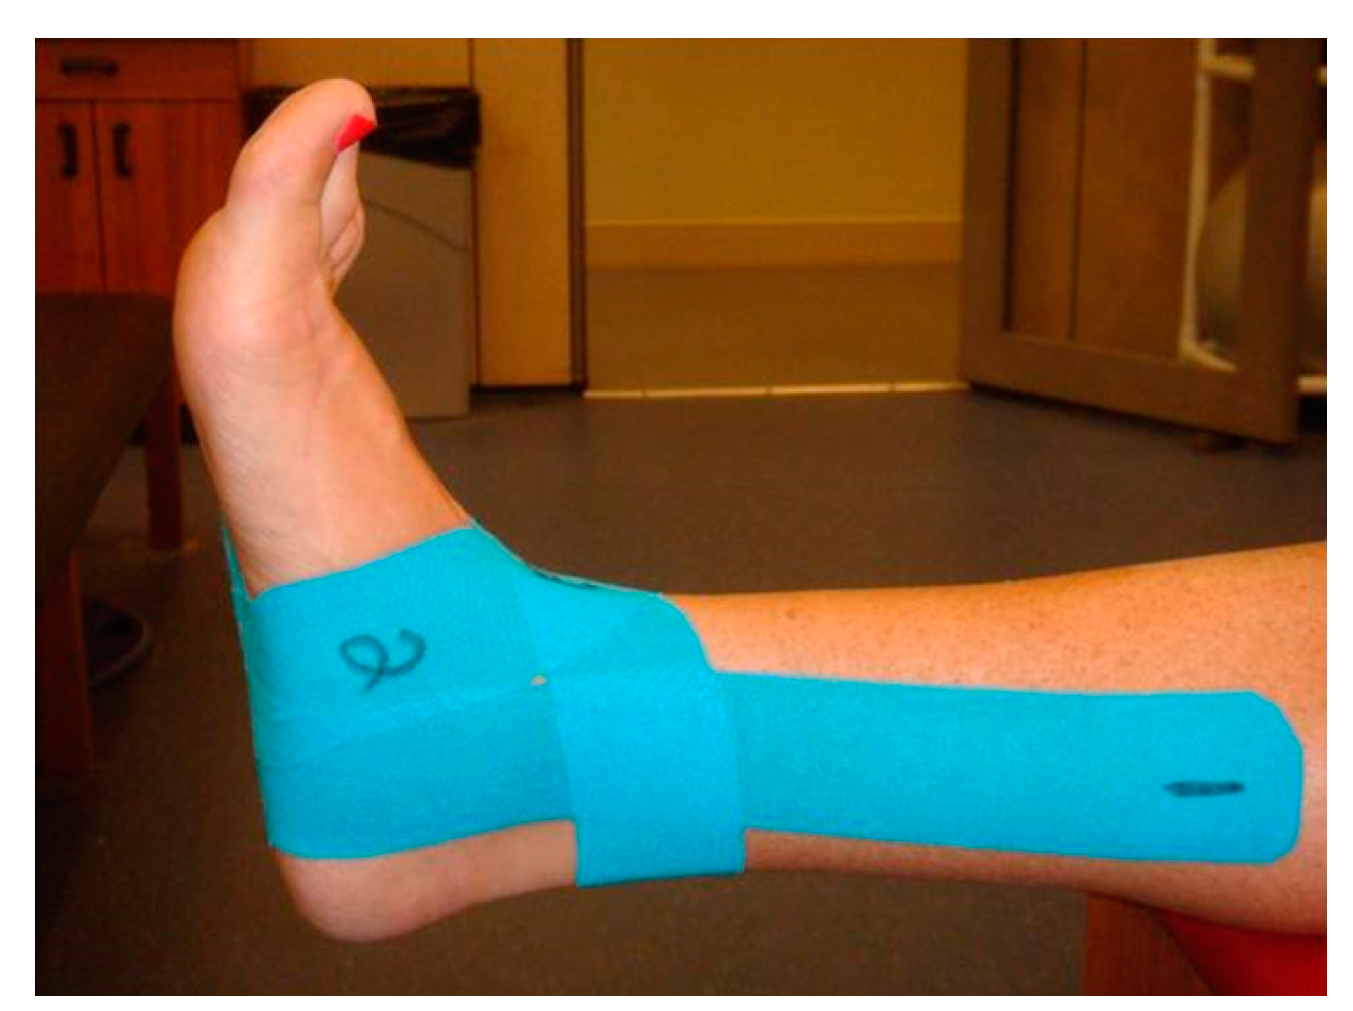 Using Kinesiology taping to stabilise the ankle - does it work